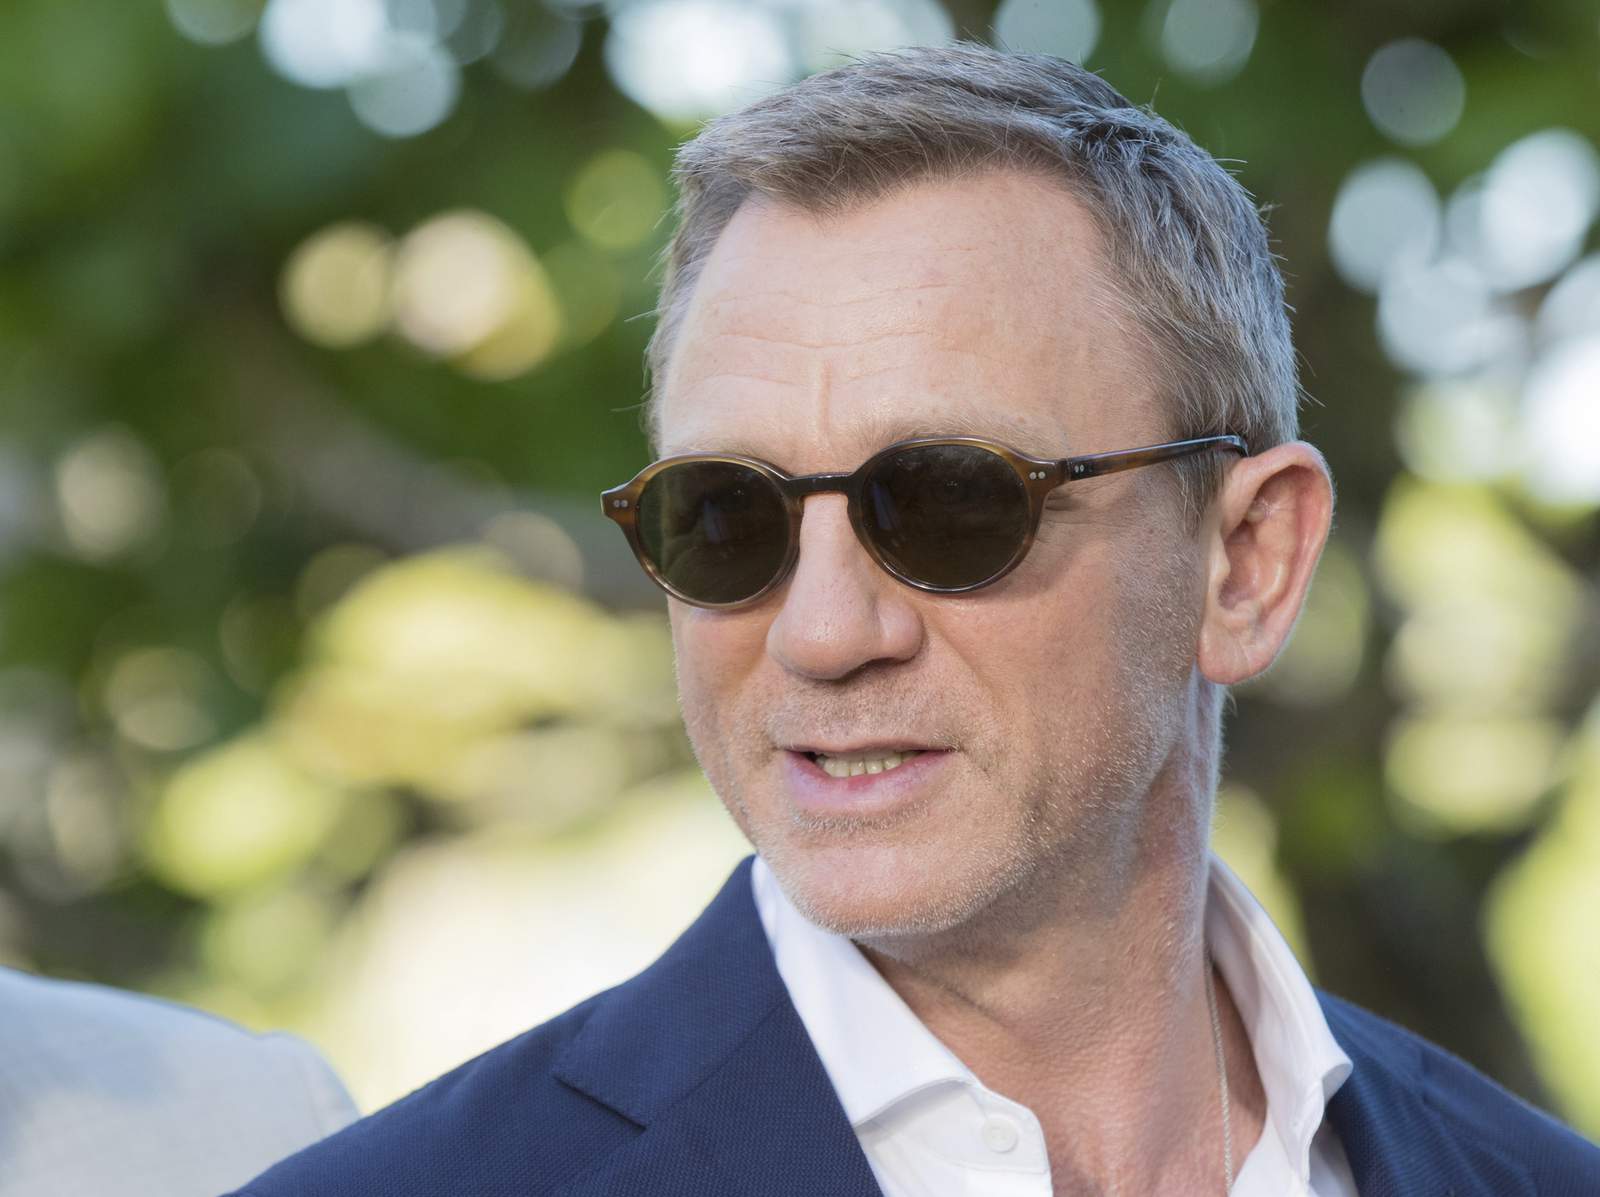 James Bond film ‘No Time to Die’ delayed again because of virus